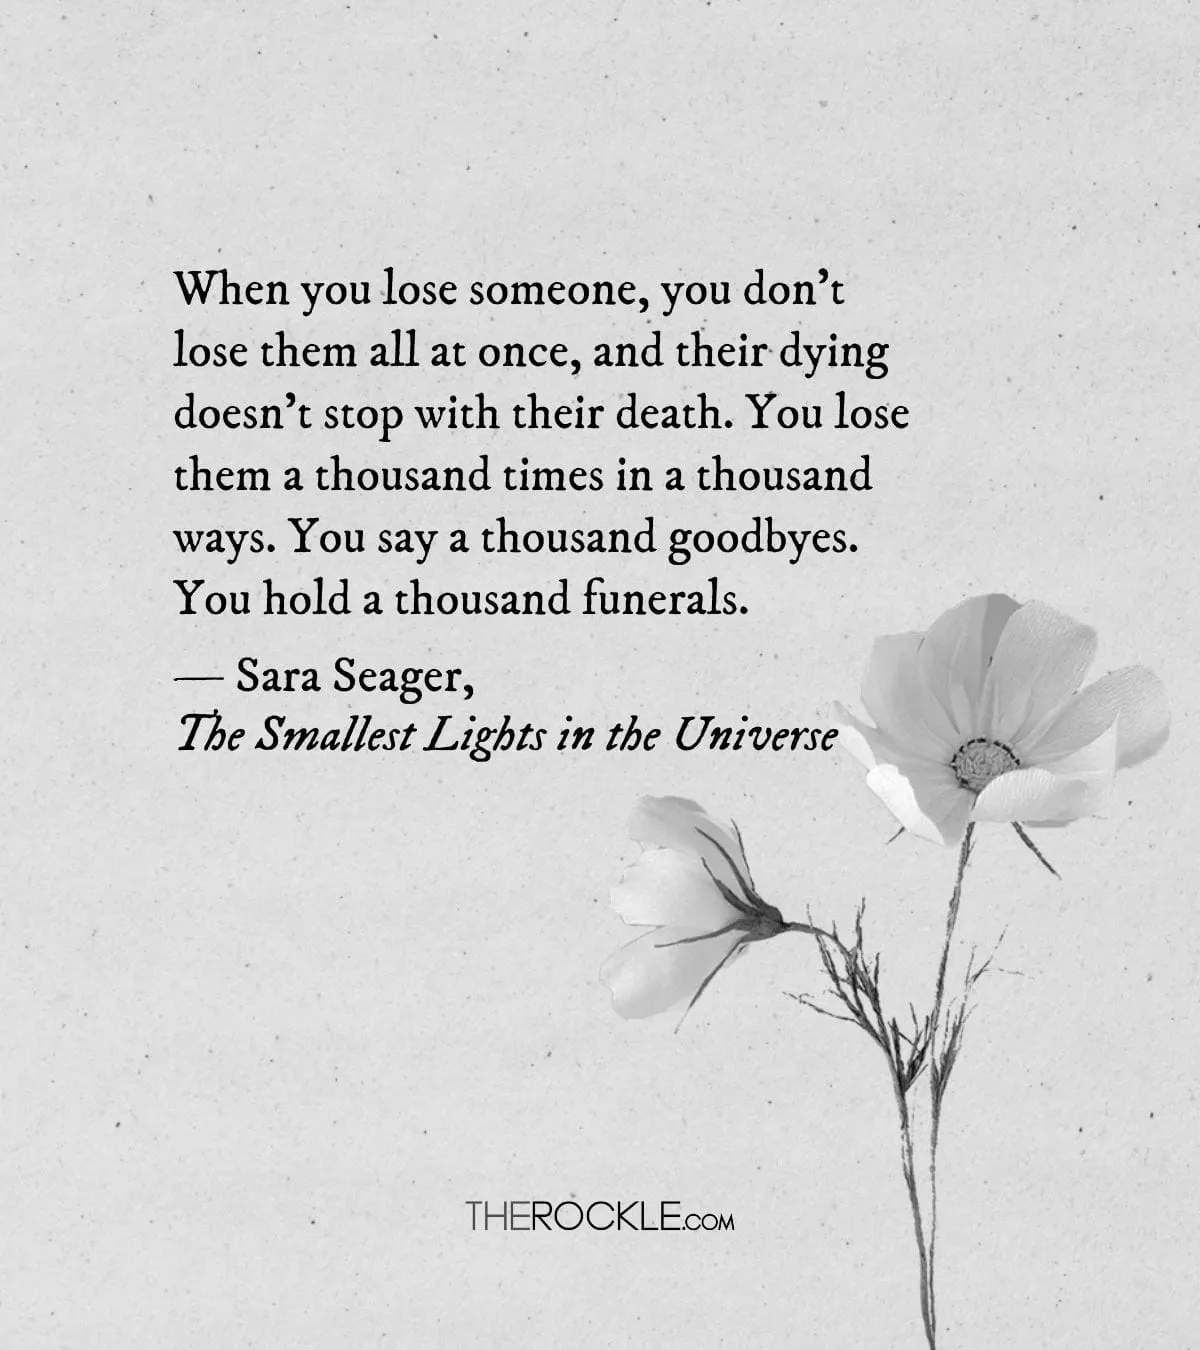 Sara Seager's quote on ongoing grief